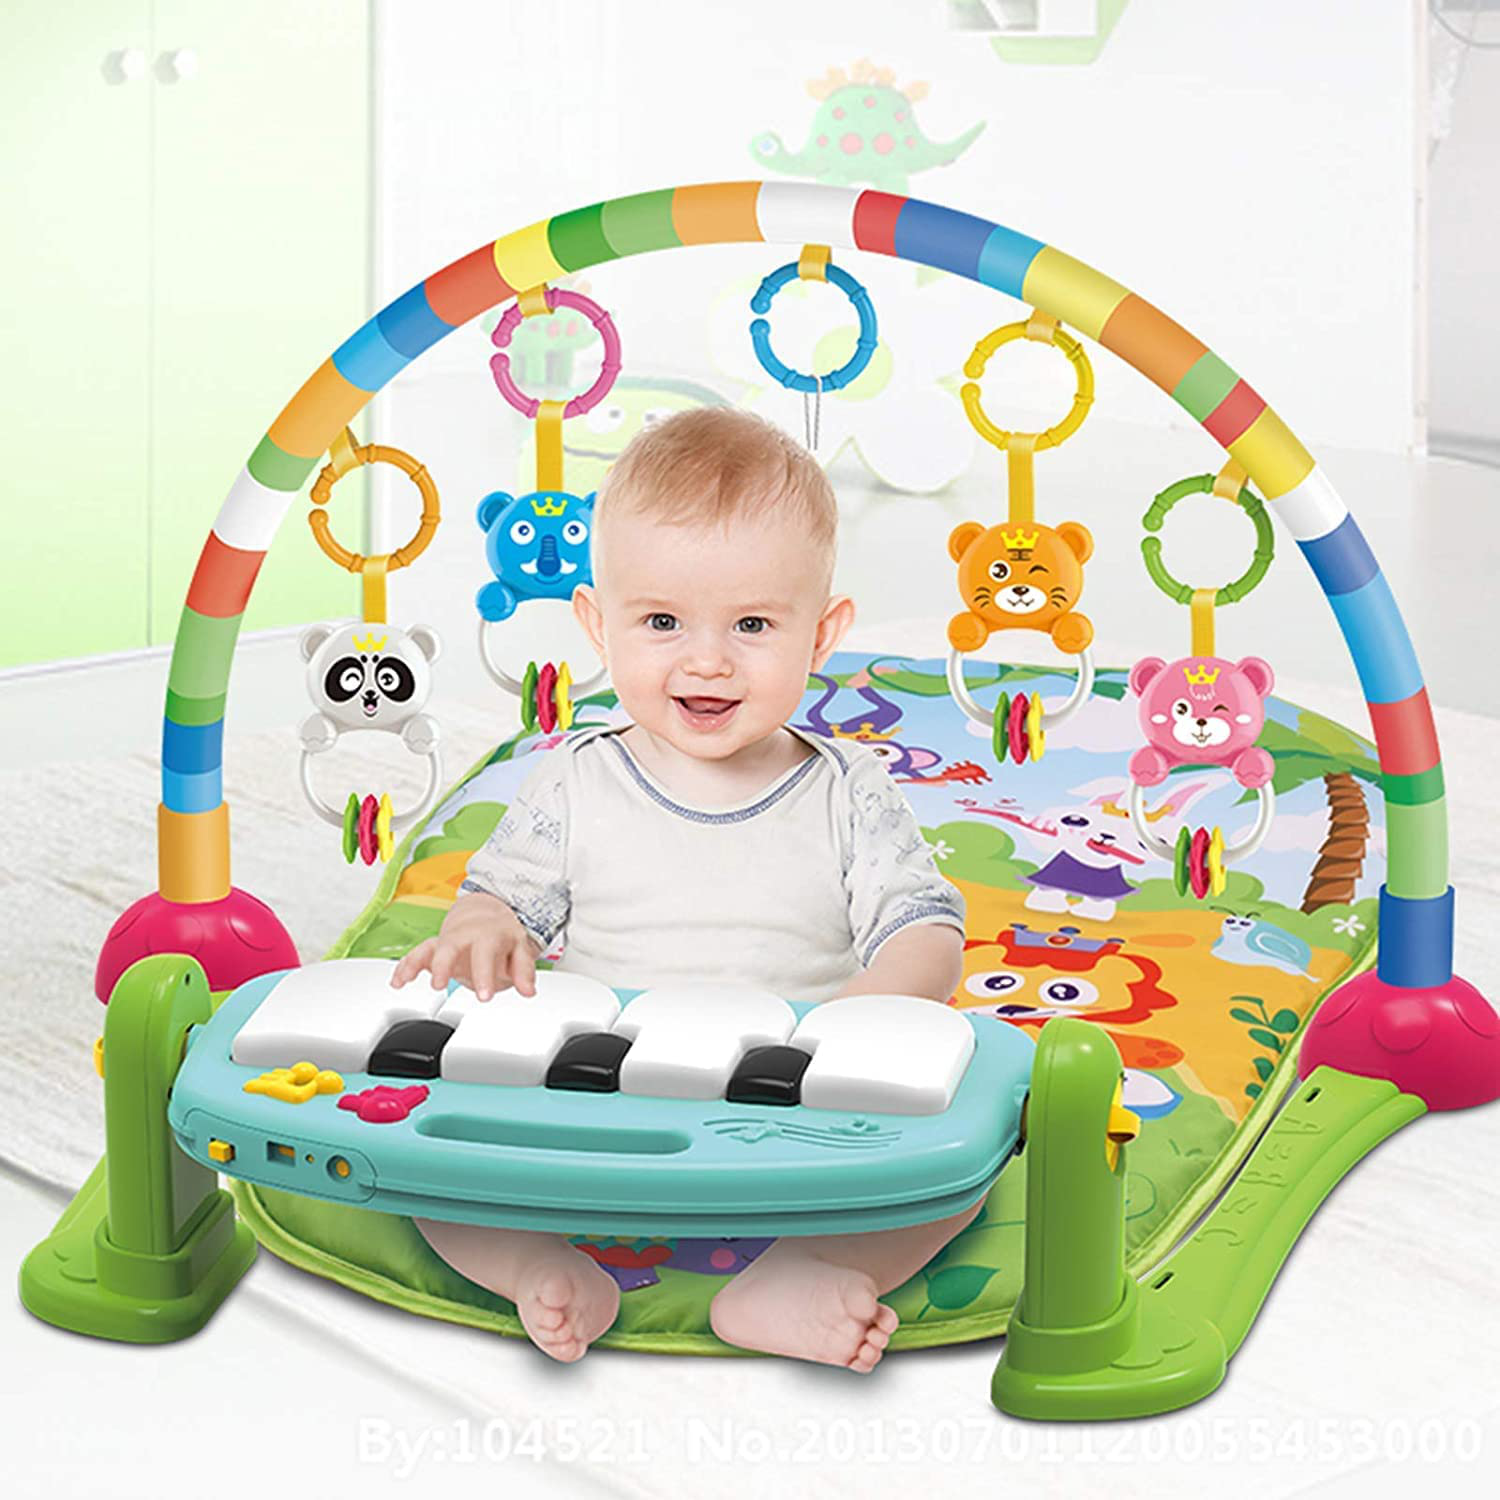 Baby Gym Jungle Musical Play Mats For Floor, Kick And Play Piano Gym  Activity Center With Music, Lights, And Sounds Toys For And Toddlers Aged 0  To 6